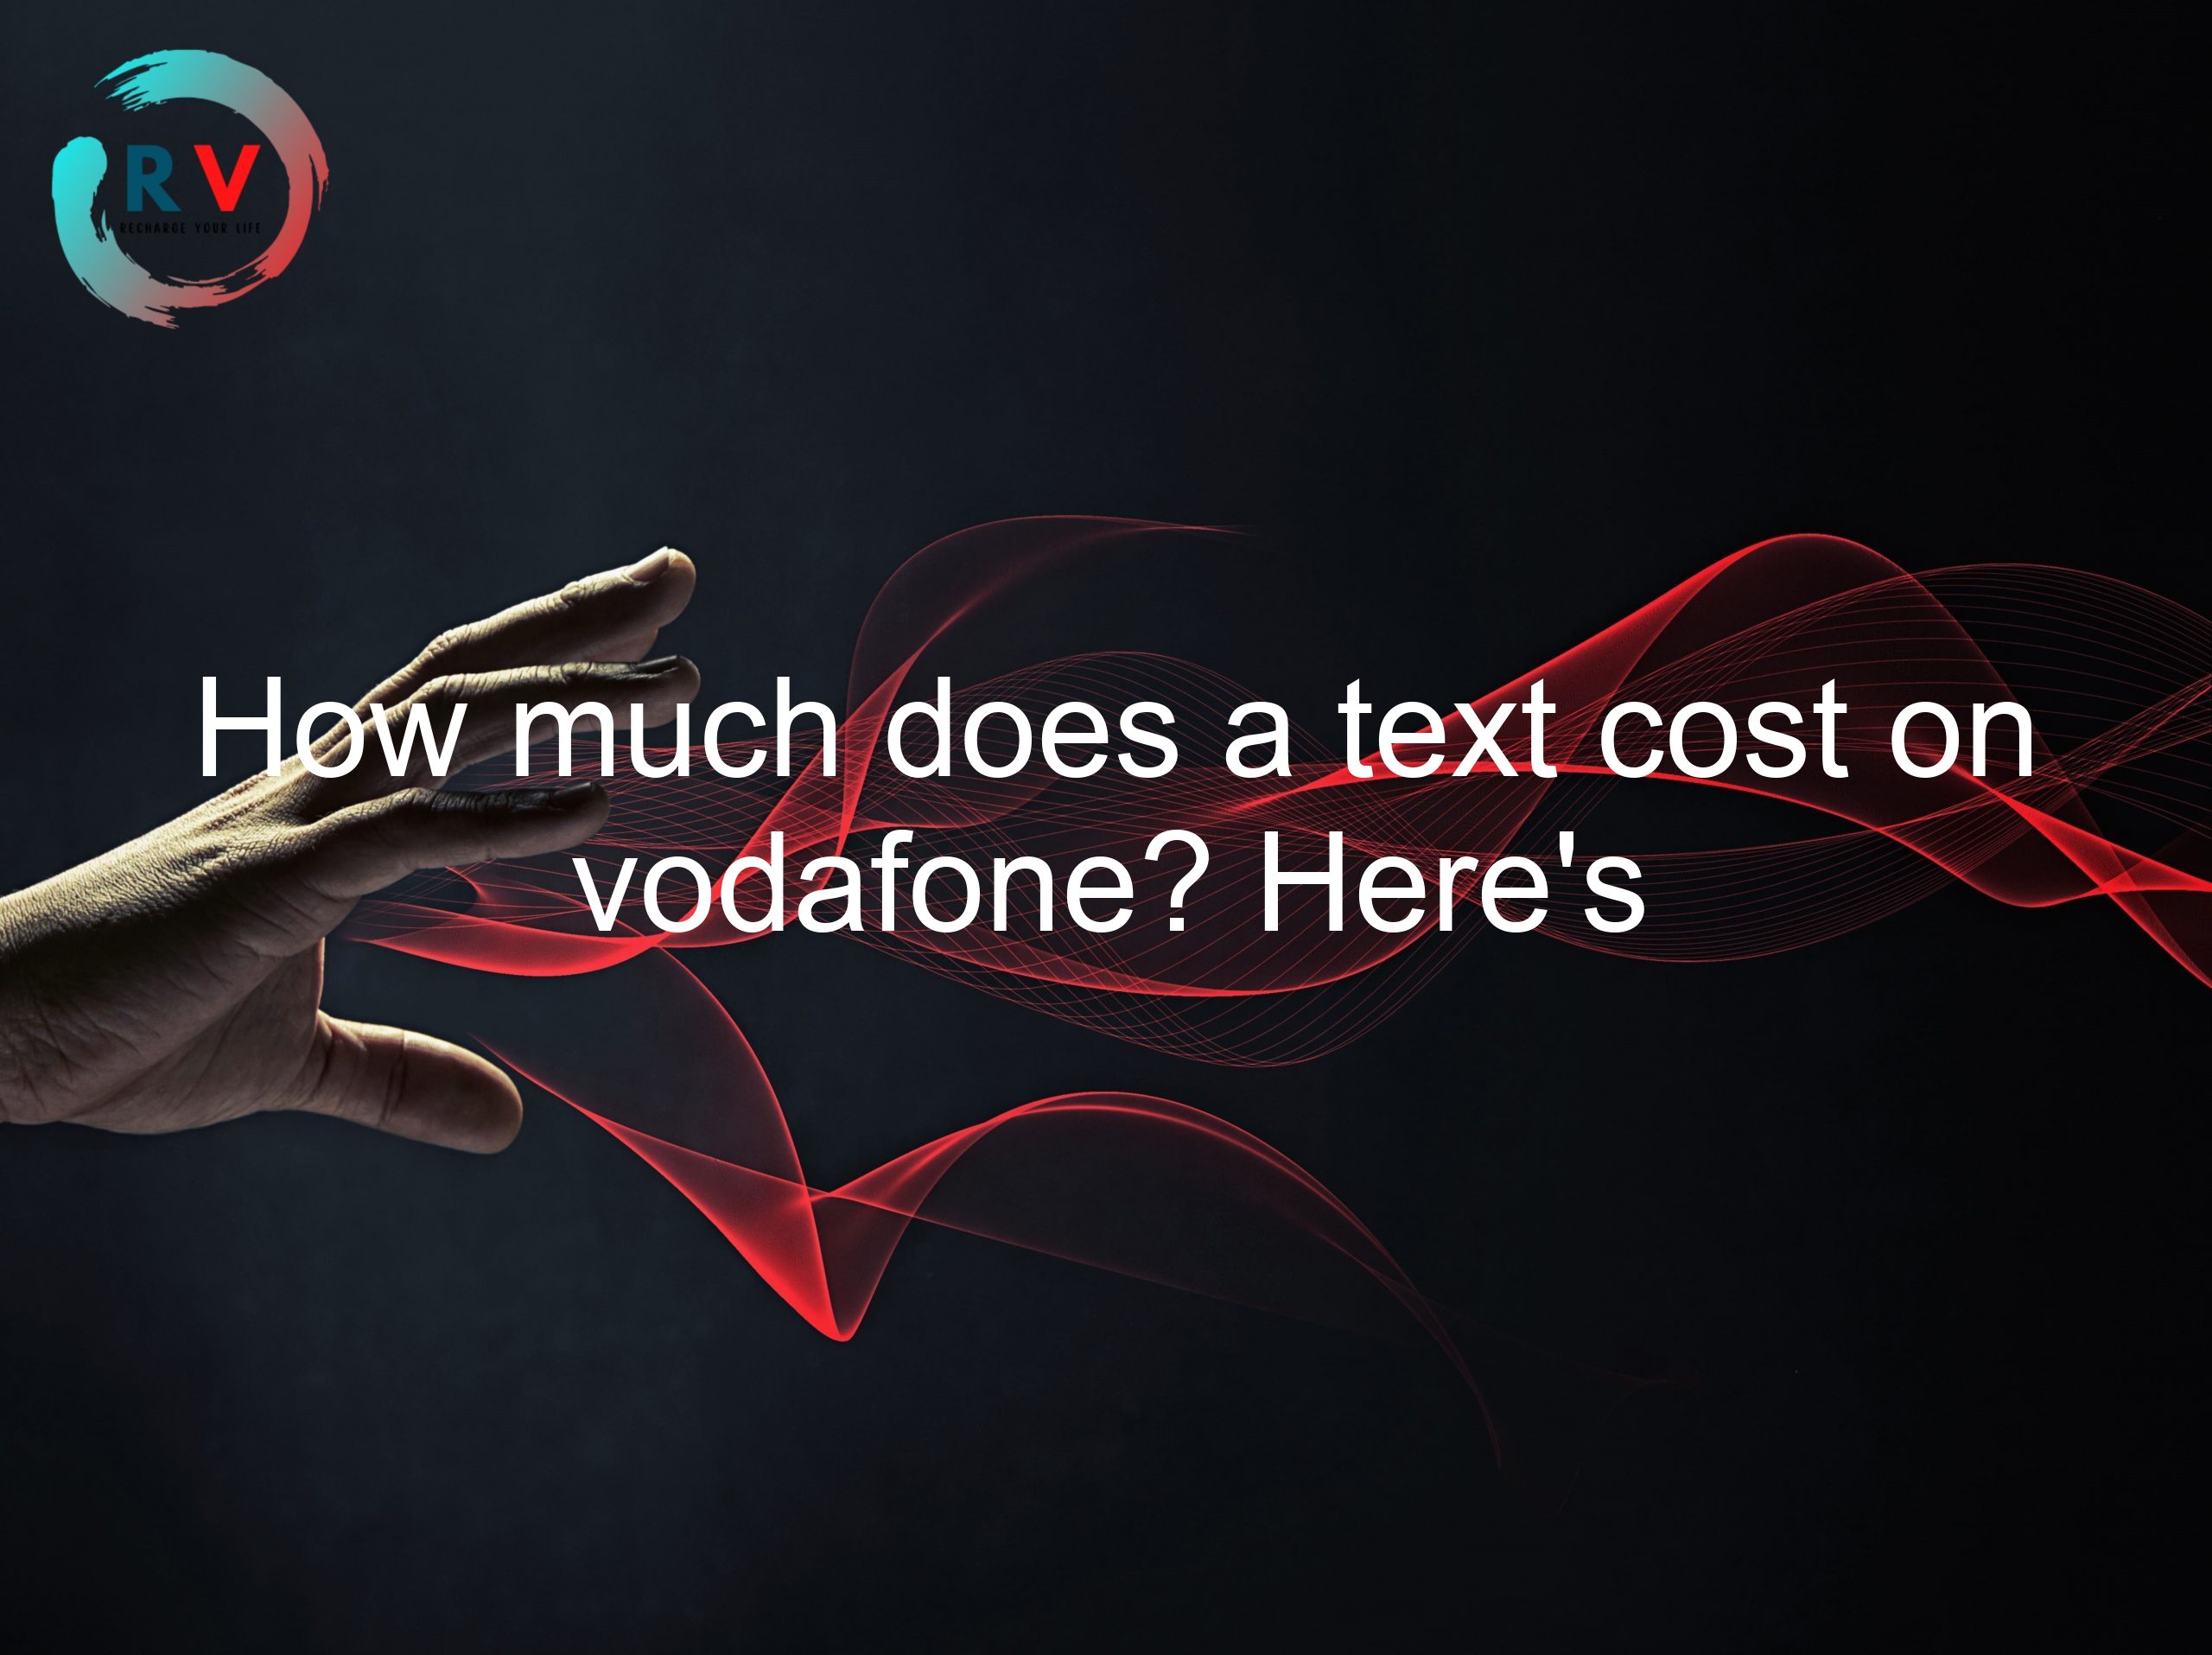 How much does a text cost on vodafone? Here's what you need to know